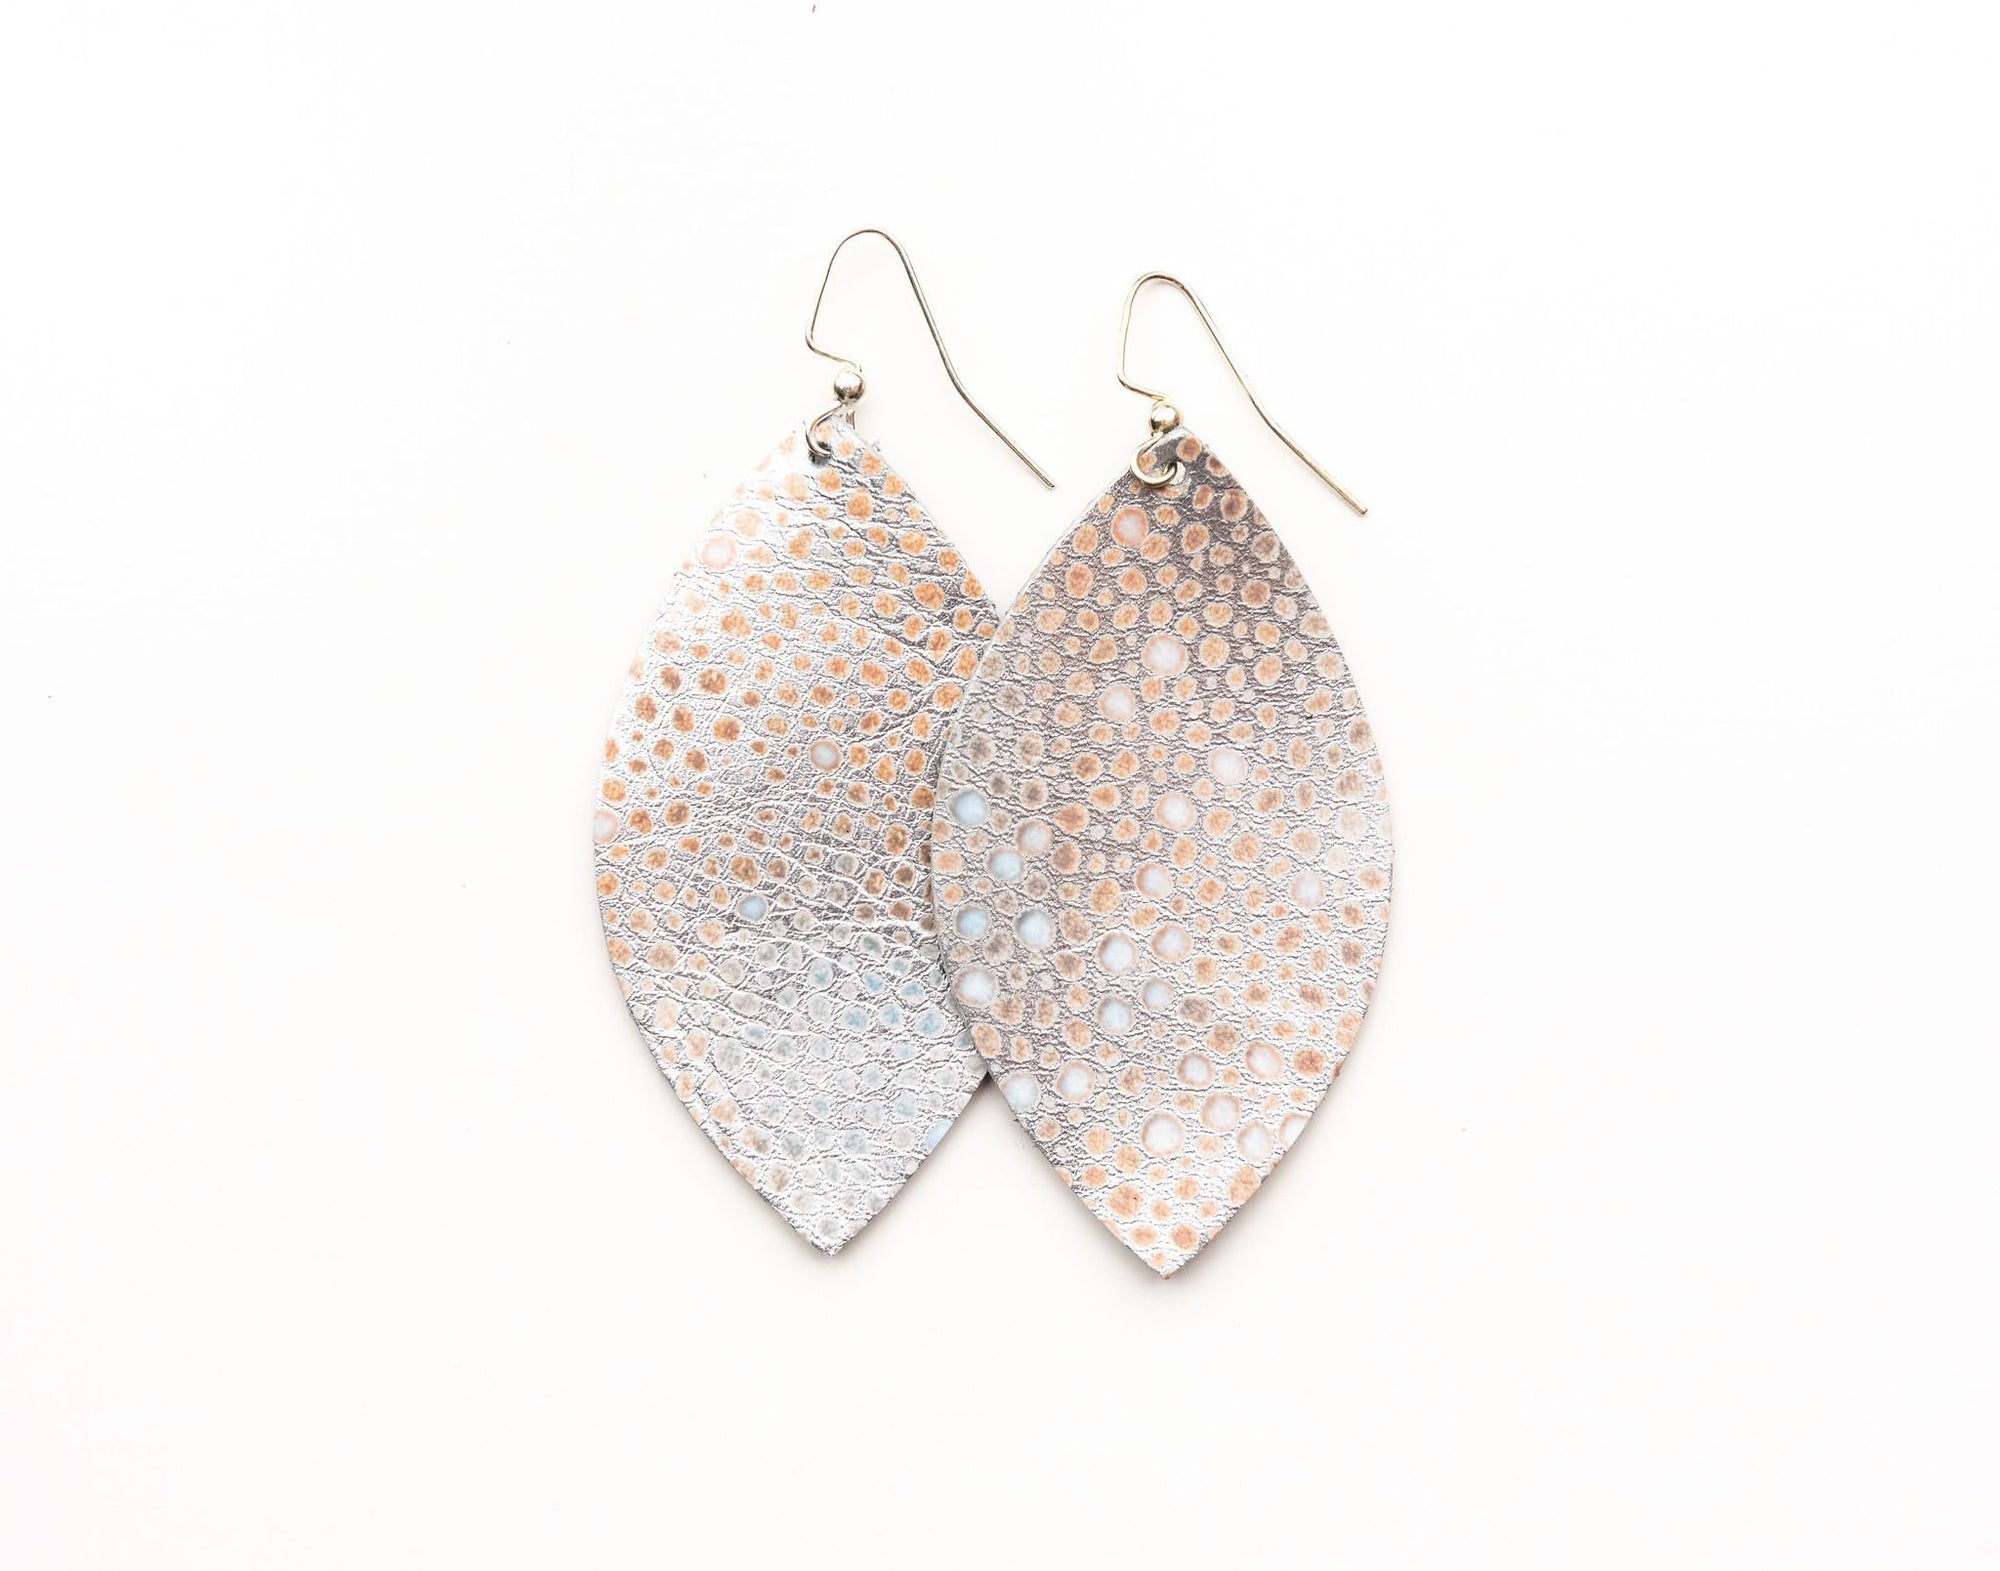 LEATHER EARRINGS - SILVER METALLIC SPECKLED (SMALL) - Molly's! A Chic and Unique Boutique 